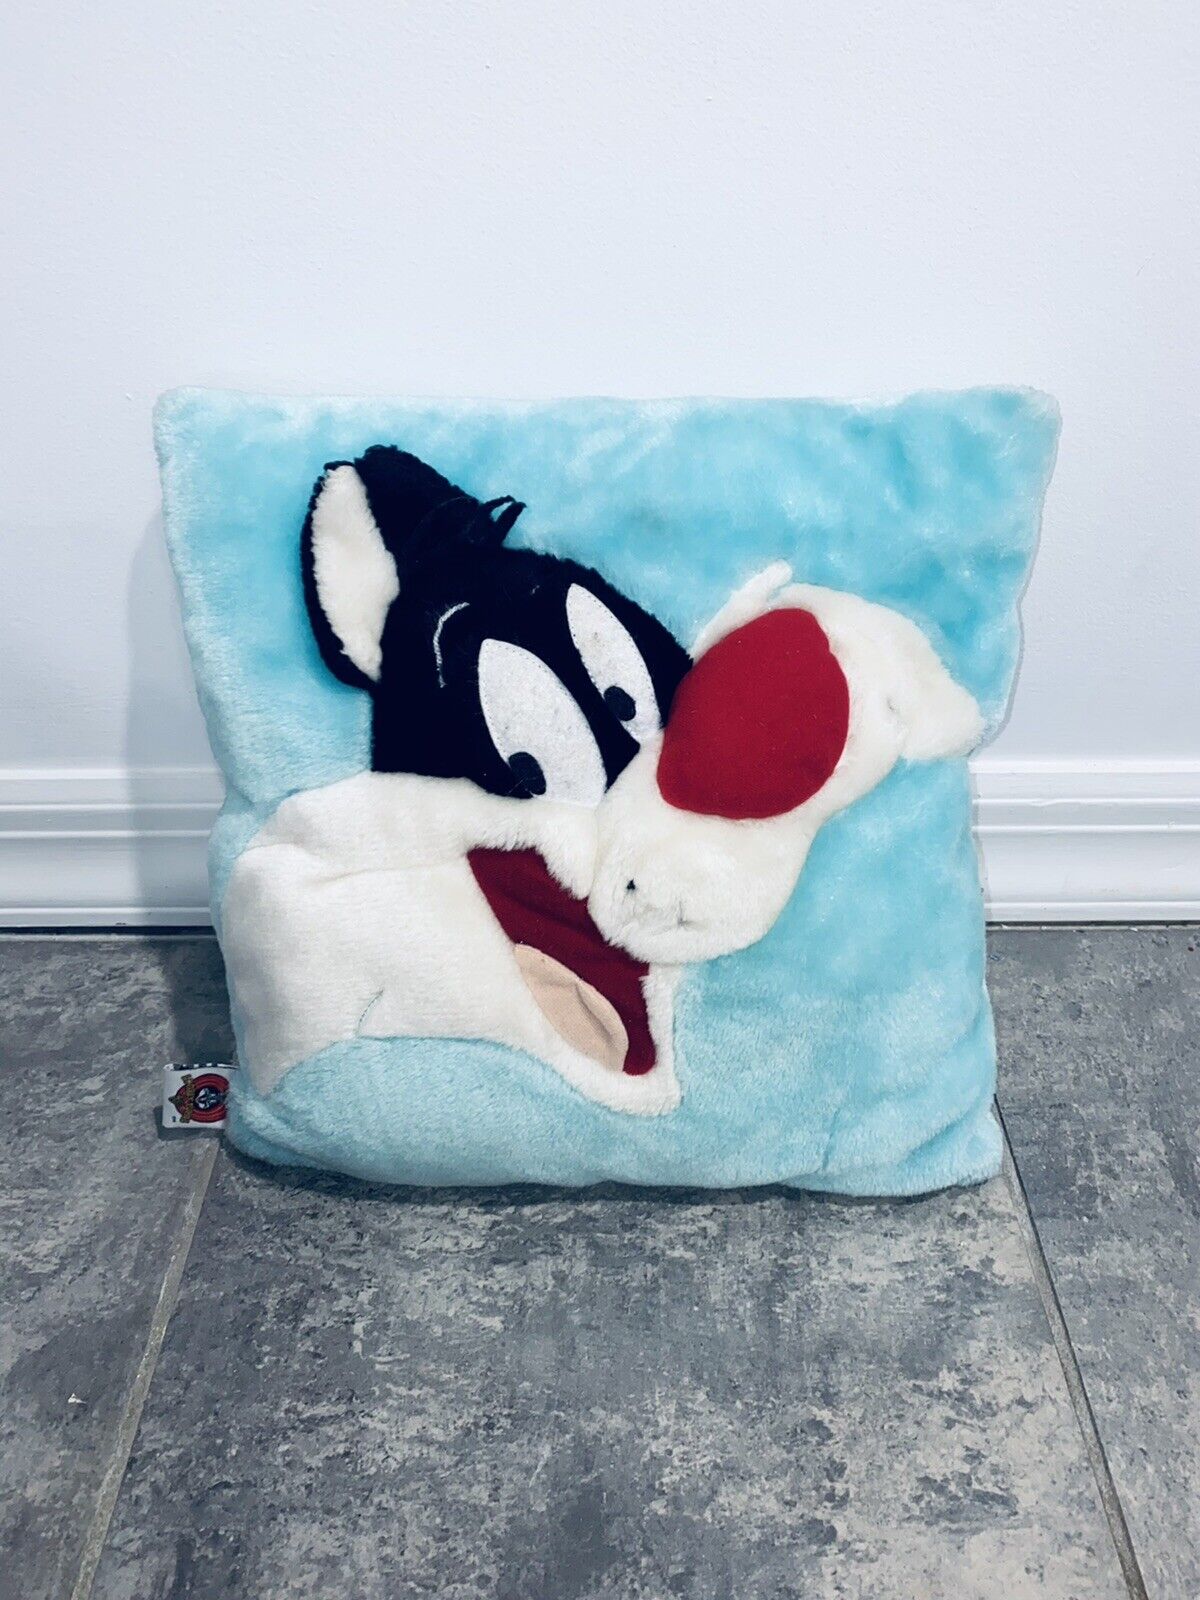 13” Warner Brothers 2000 Pillow Sylvester Throw Pillow Plush Doll Square Vintage